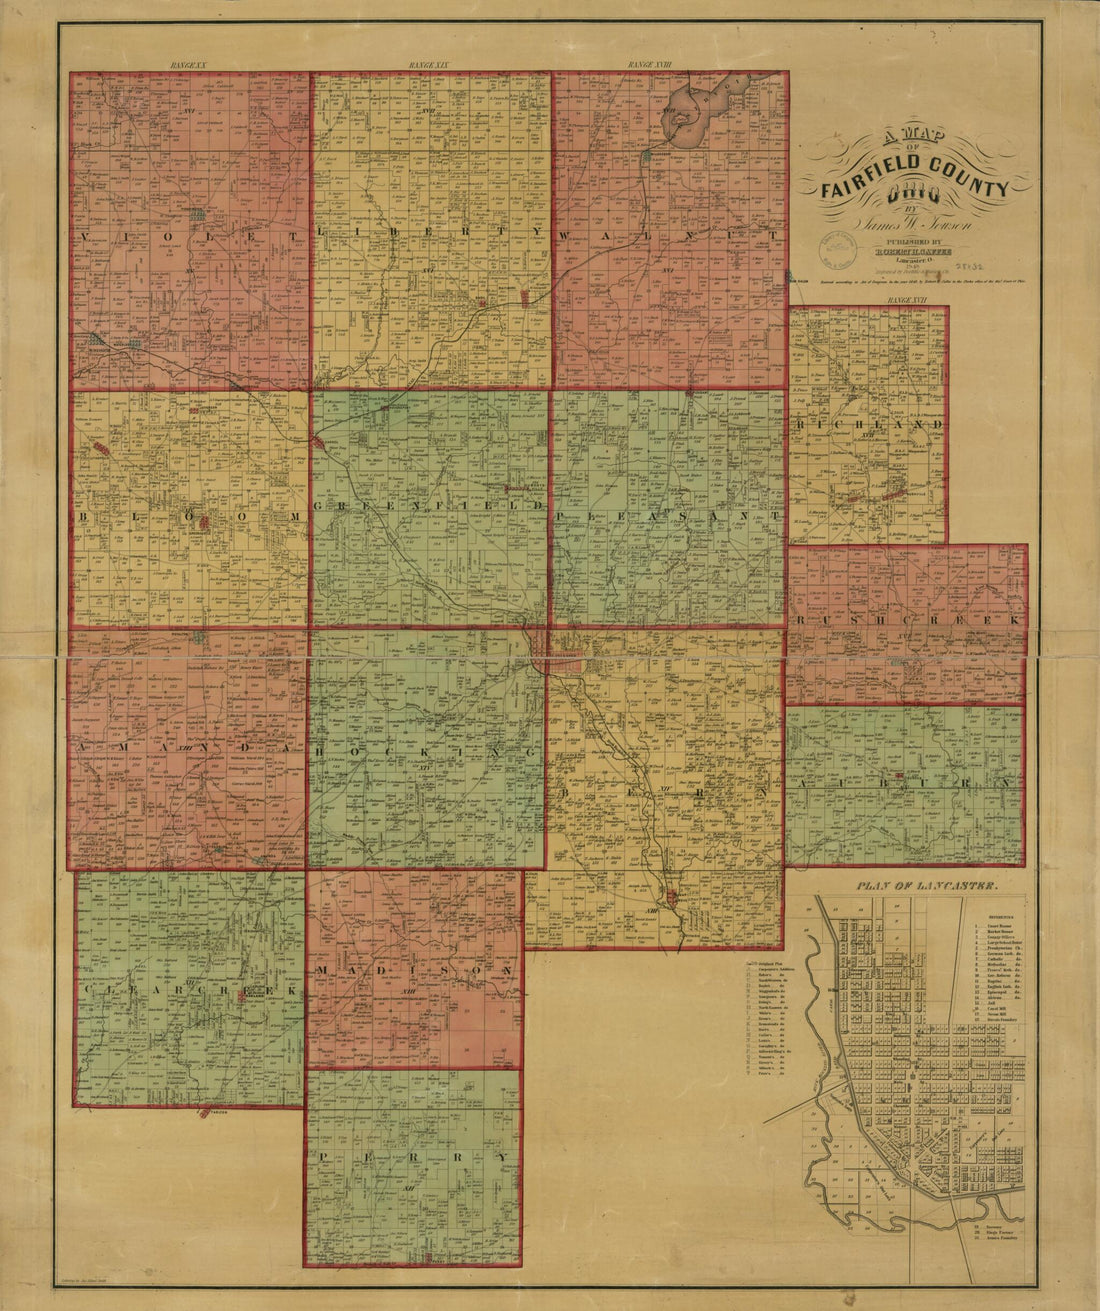 This old map of A Map of Fairfield County, Ohio from 1848 was created by  Doolittle &amp; Munson, James W. Towson in 1848